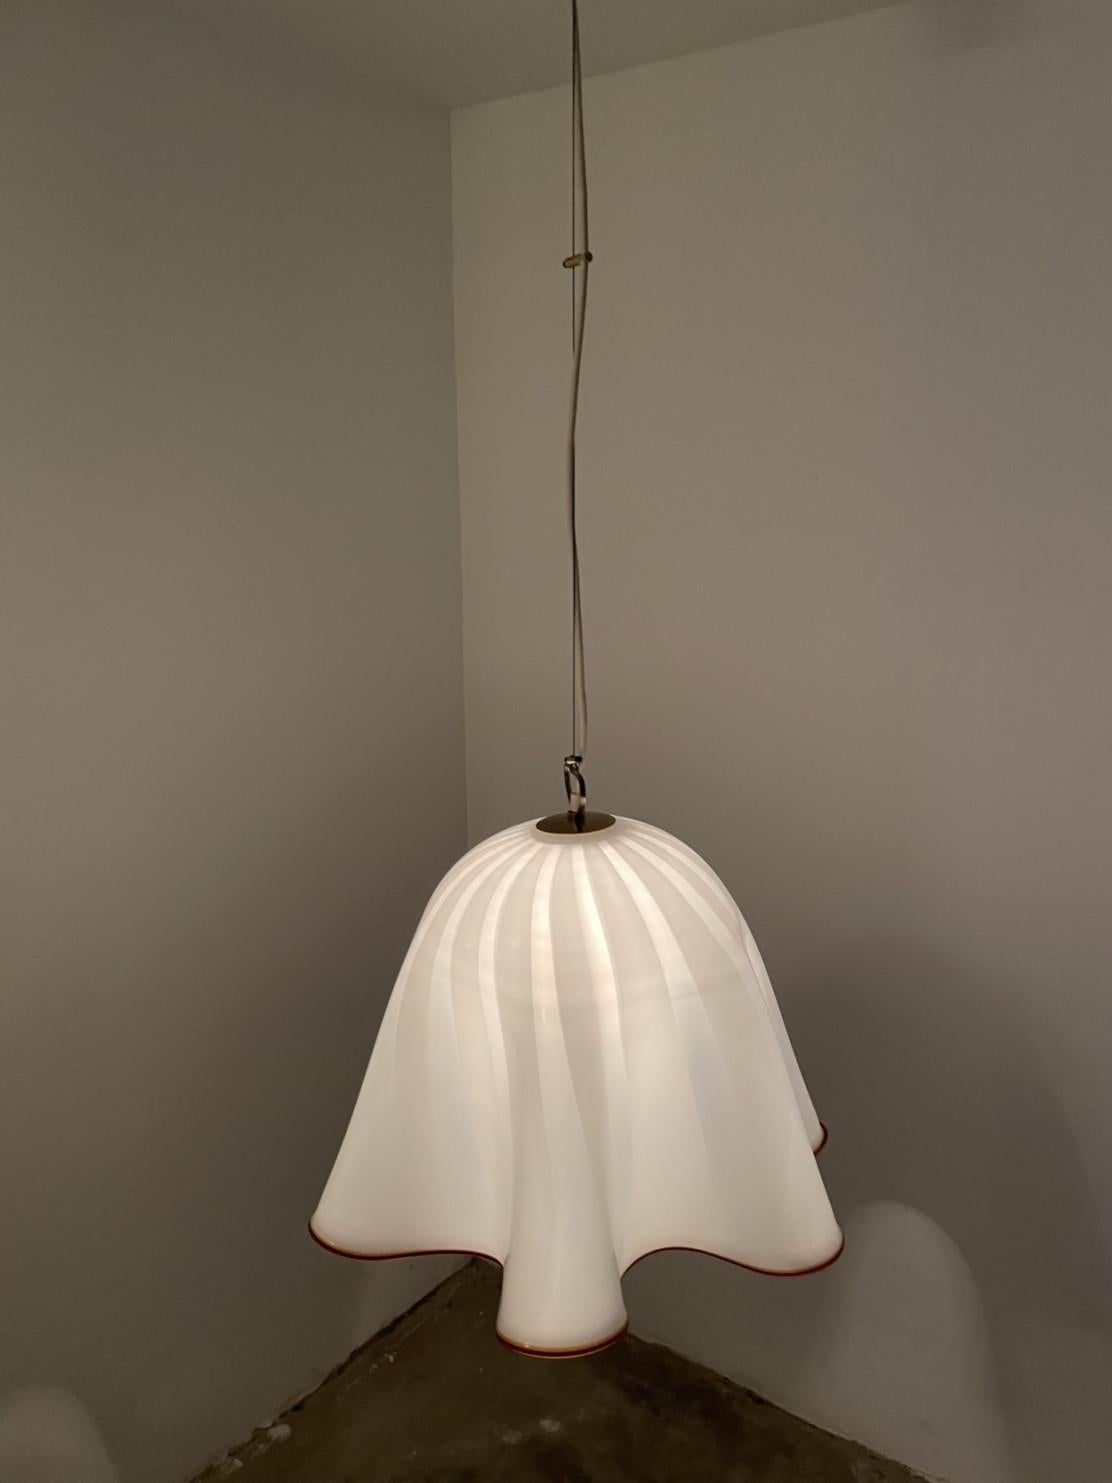 1 of the 2 Large Murano Glass Fazzoletto Pendant Light by J.T. Kalmar, 1960s For Sale 2